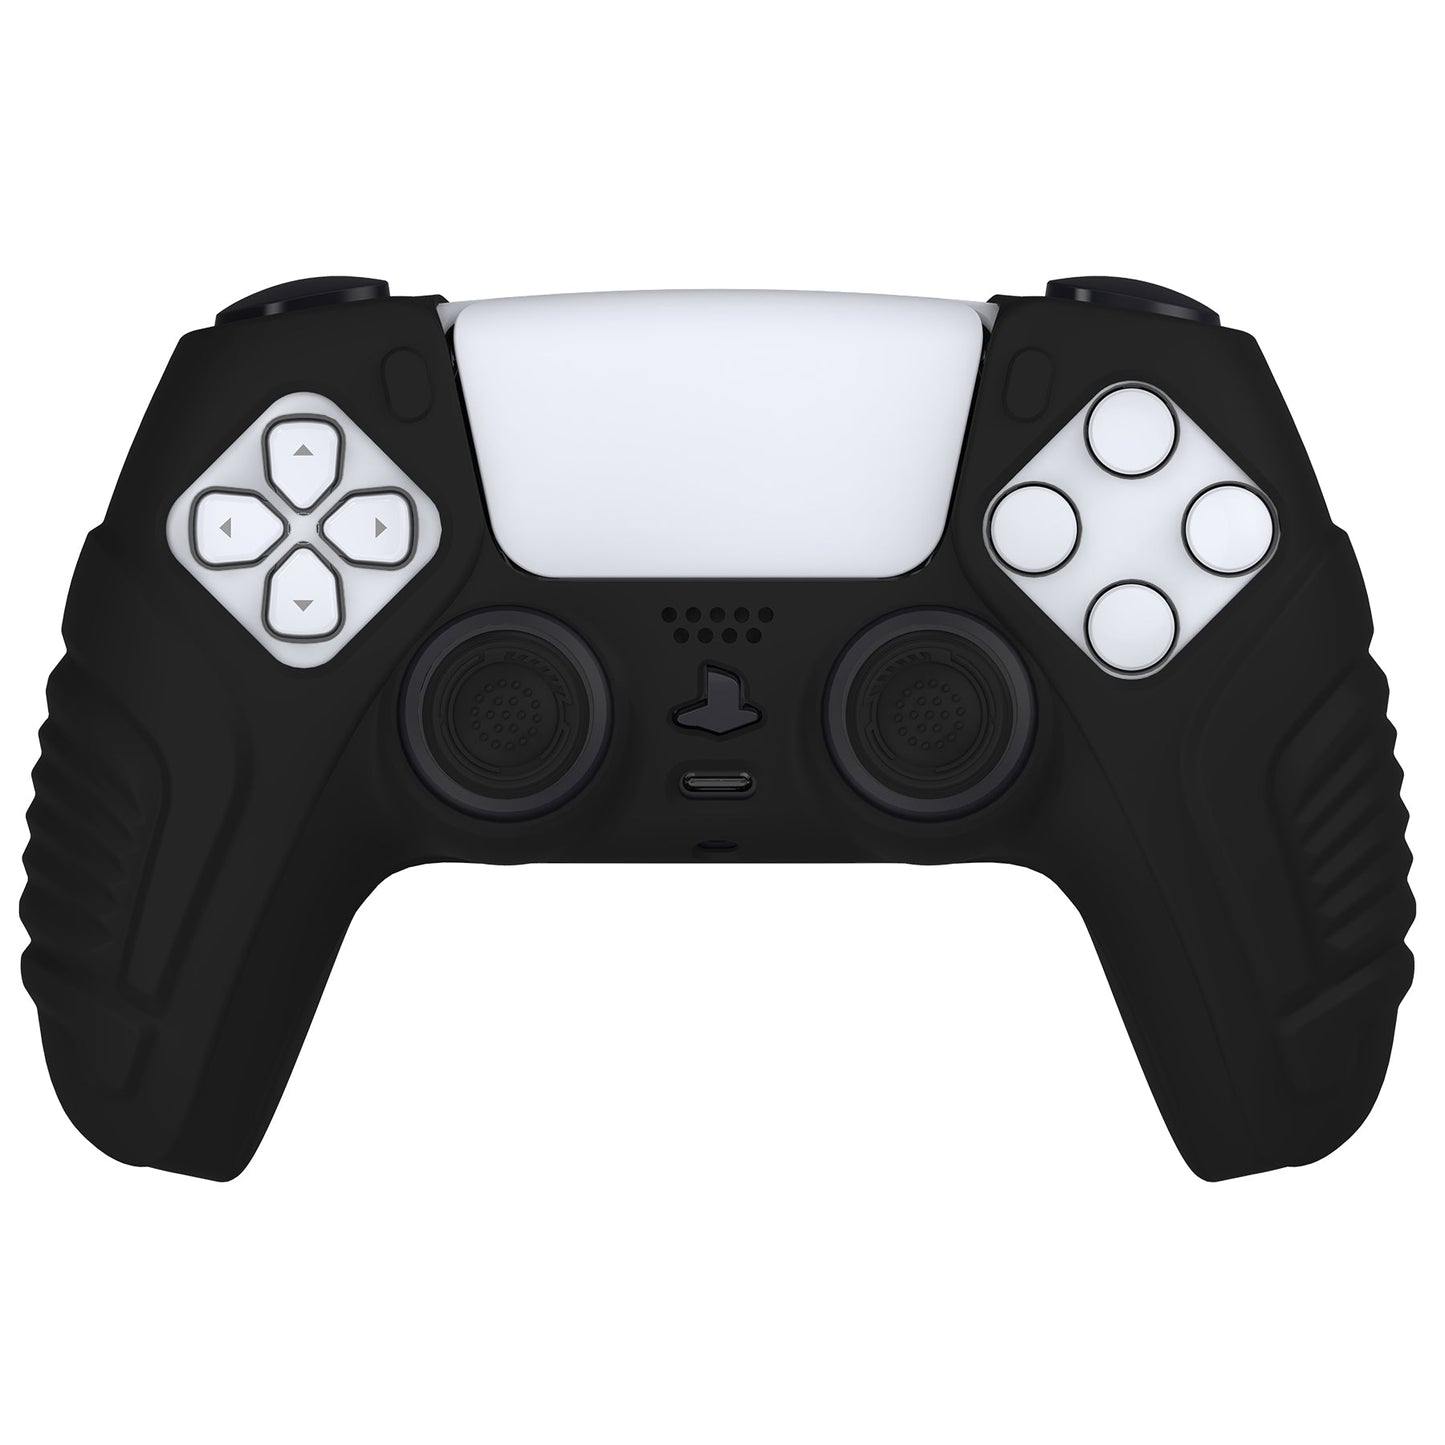 PlayVital Raging Warrior Edition Black Controller Protective Case Cover for PS5, Anti-slip Rubber Protector for PS5 Wireless Controller, Soft Silicone Skin for PS5 Controller with Thumbstick Cap - KZPF001 PlayVital